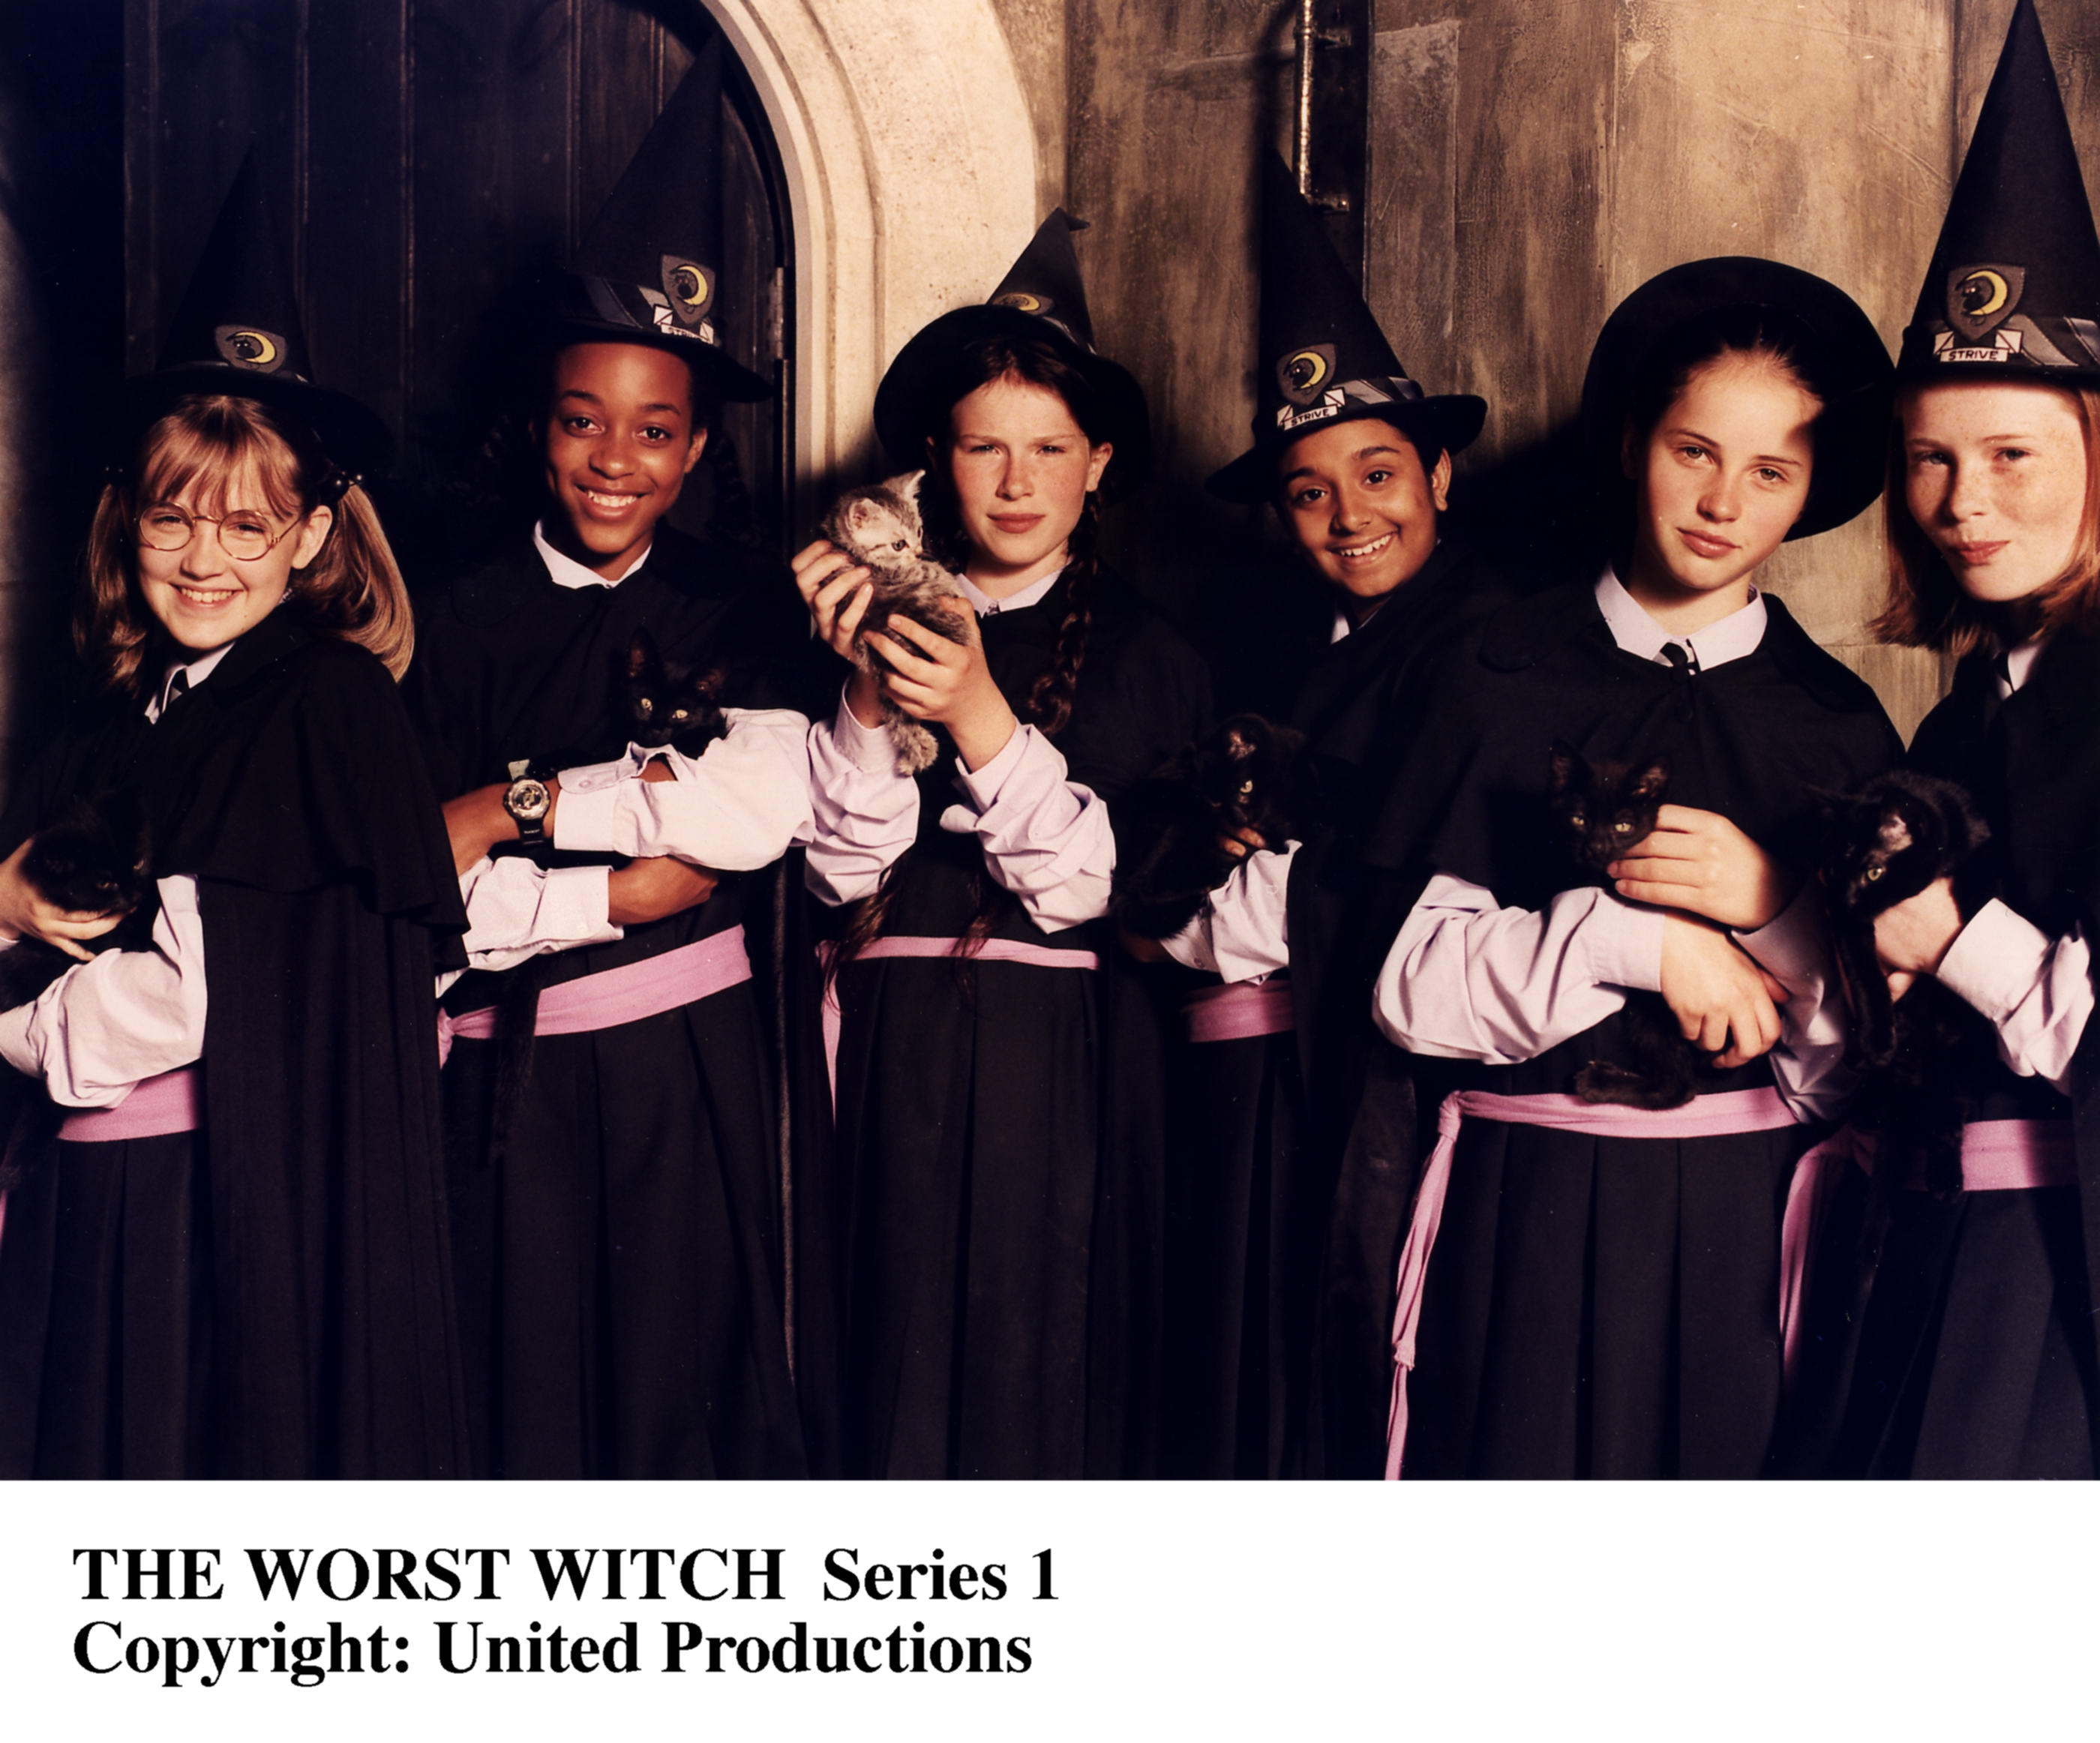 Witches' Cats. The Worst Witch